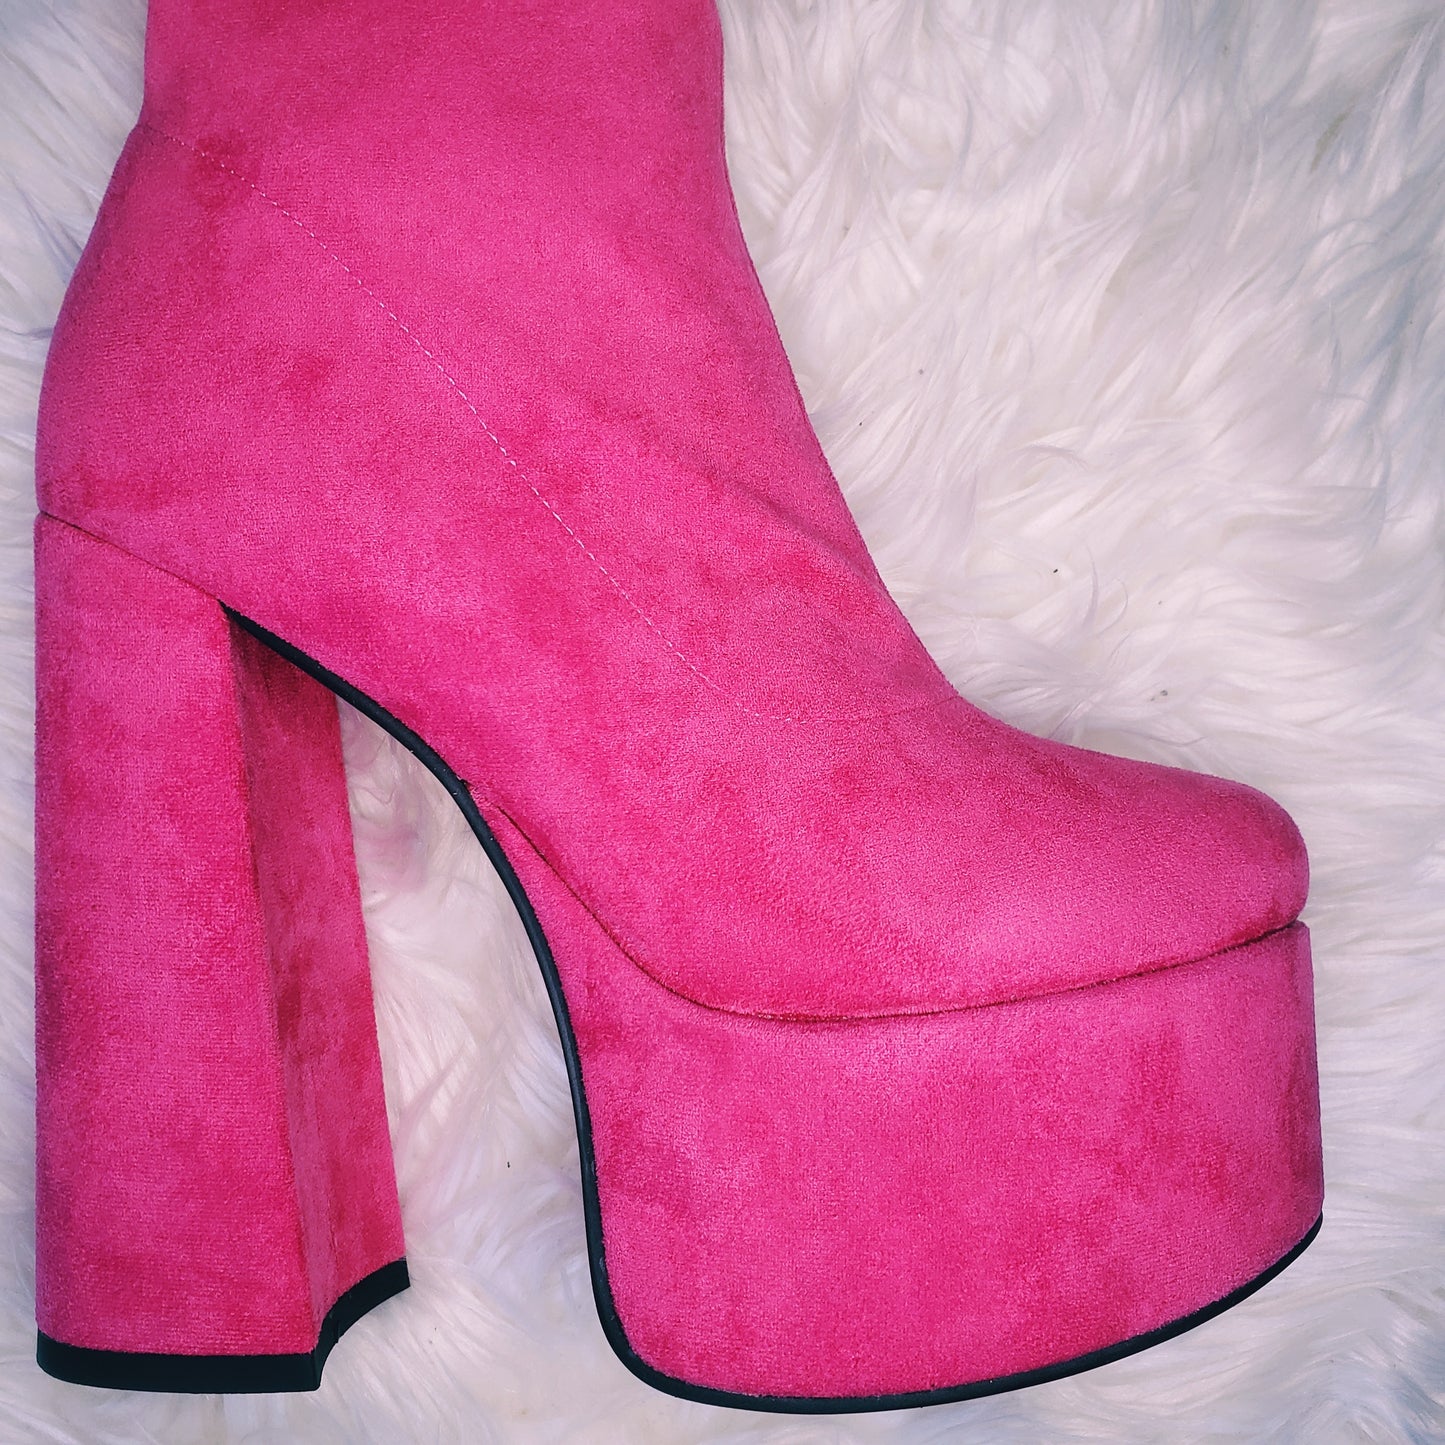 Pink suede retro chunky platform boots. Round toe and block heel give it a 60's and 70's inspired twist. Knee high suede boots. 